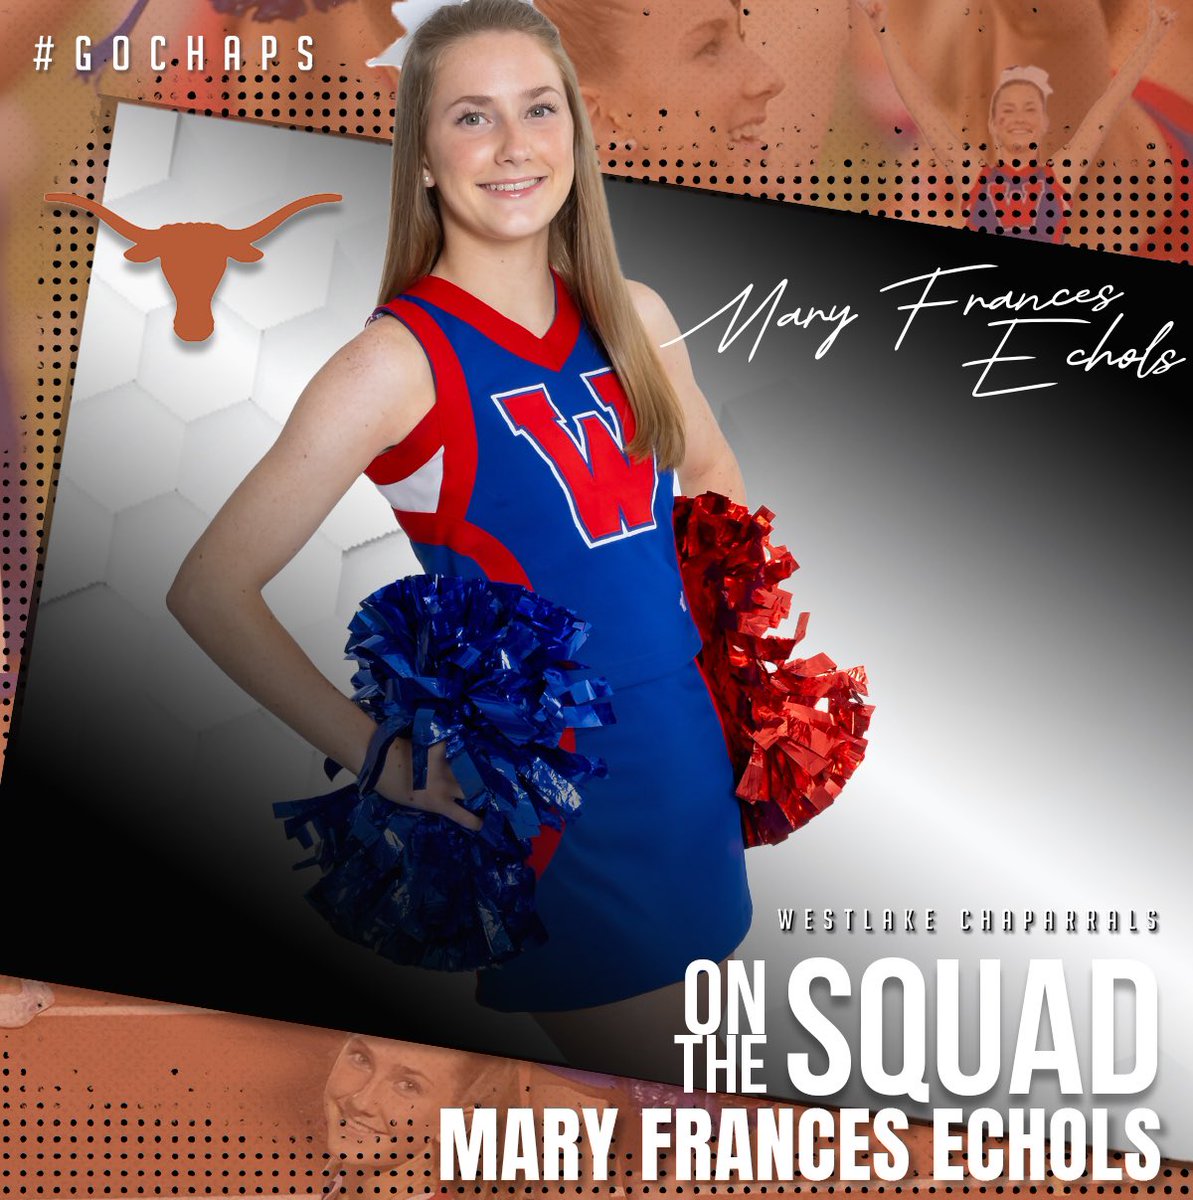 Mary Frances Echols is headed to the 40 acres to continue her academic and cheerleading career at the University of Texas at Austin. Congratulations, Mary Frances. #GoChaps #HookEm